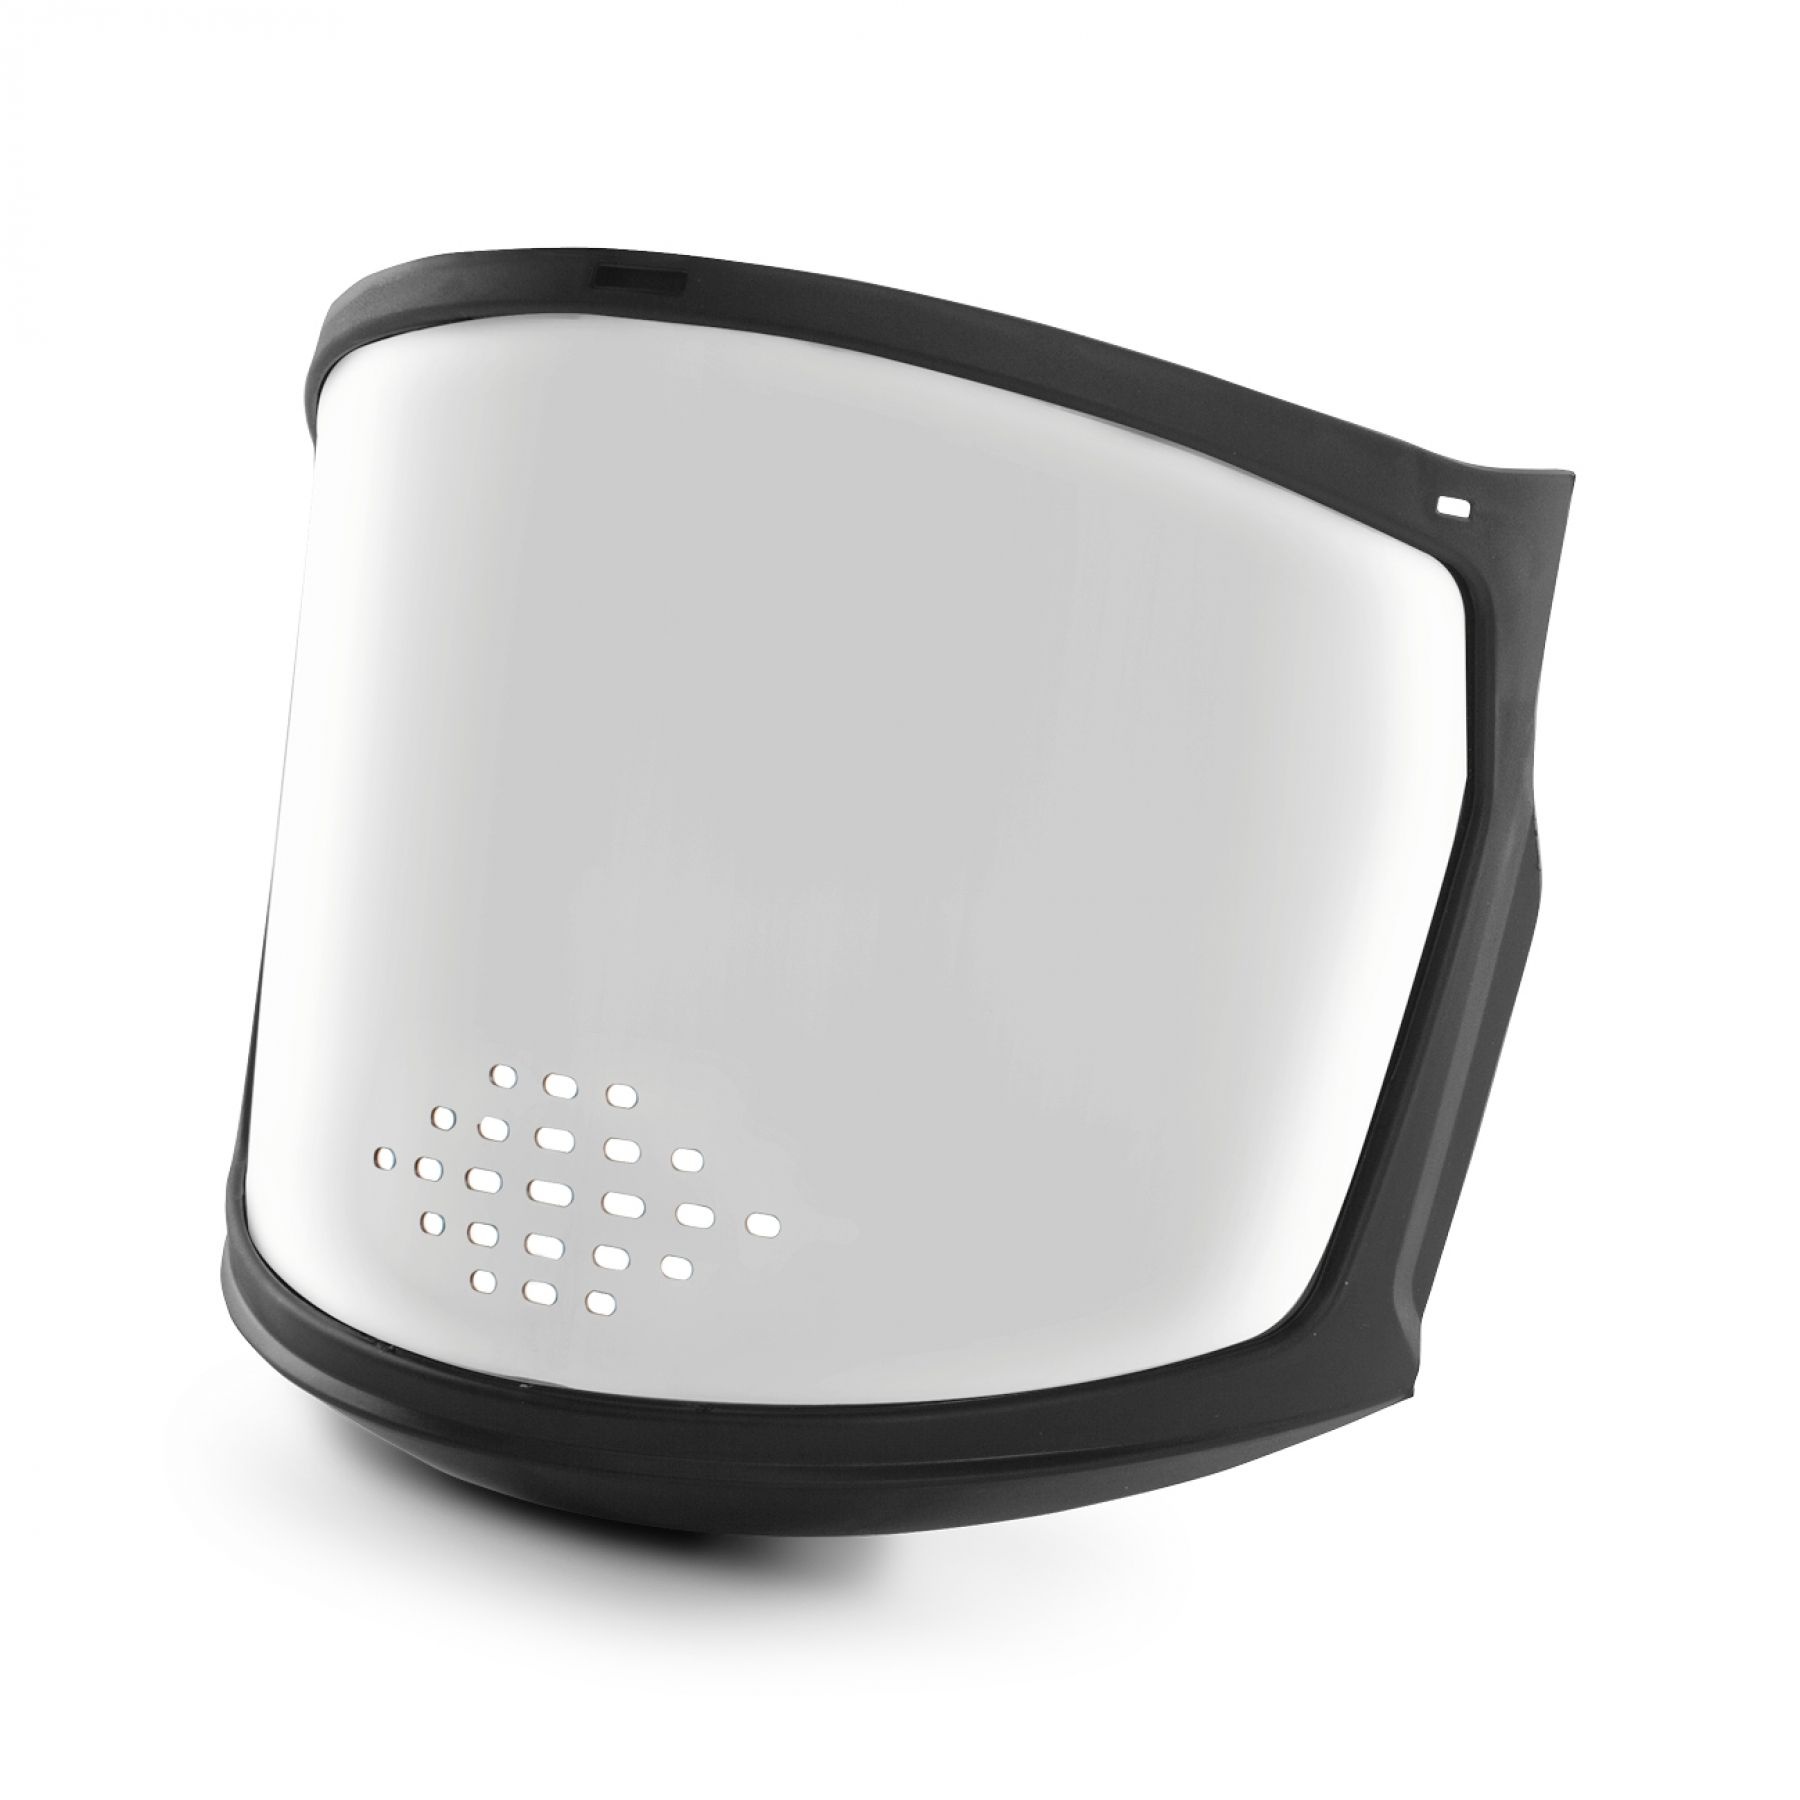 Kask Zen FF Air- Full Face Visor from Columbia Safety